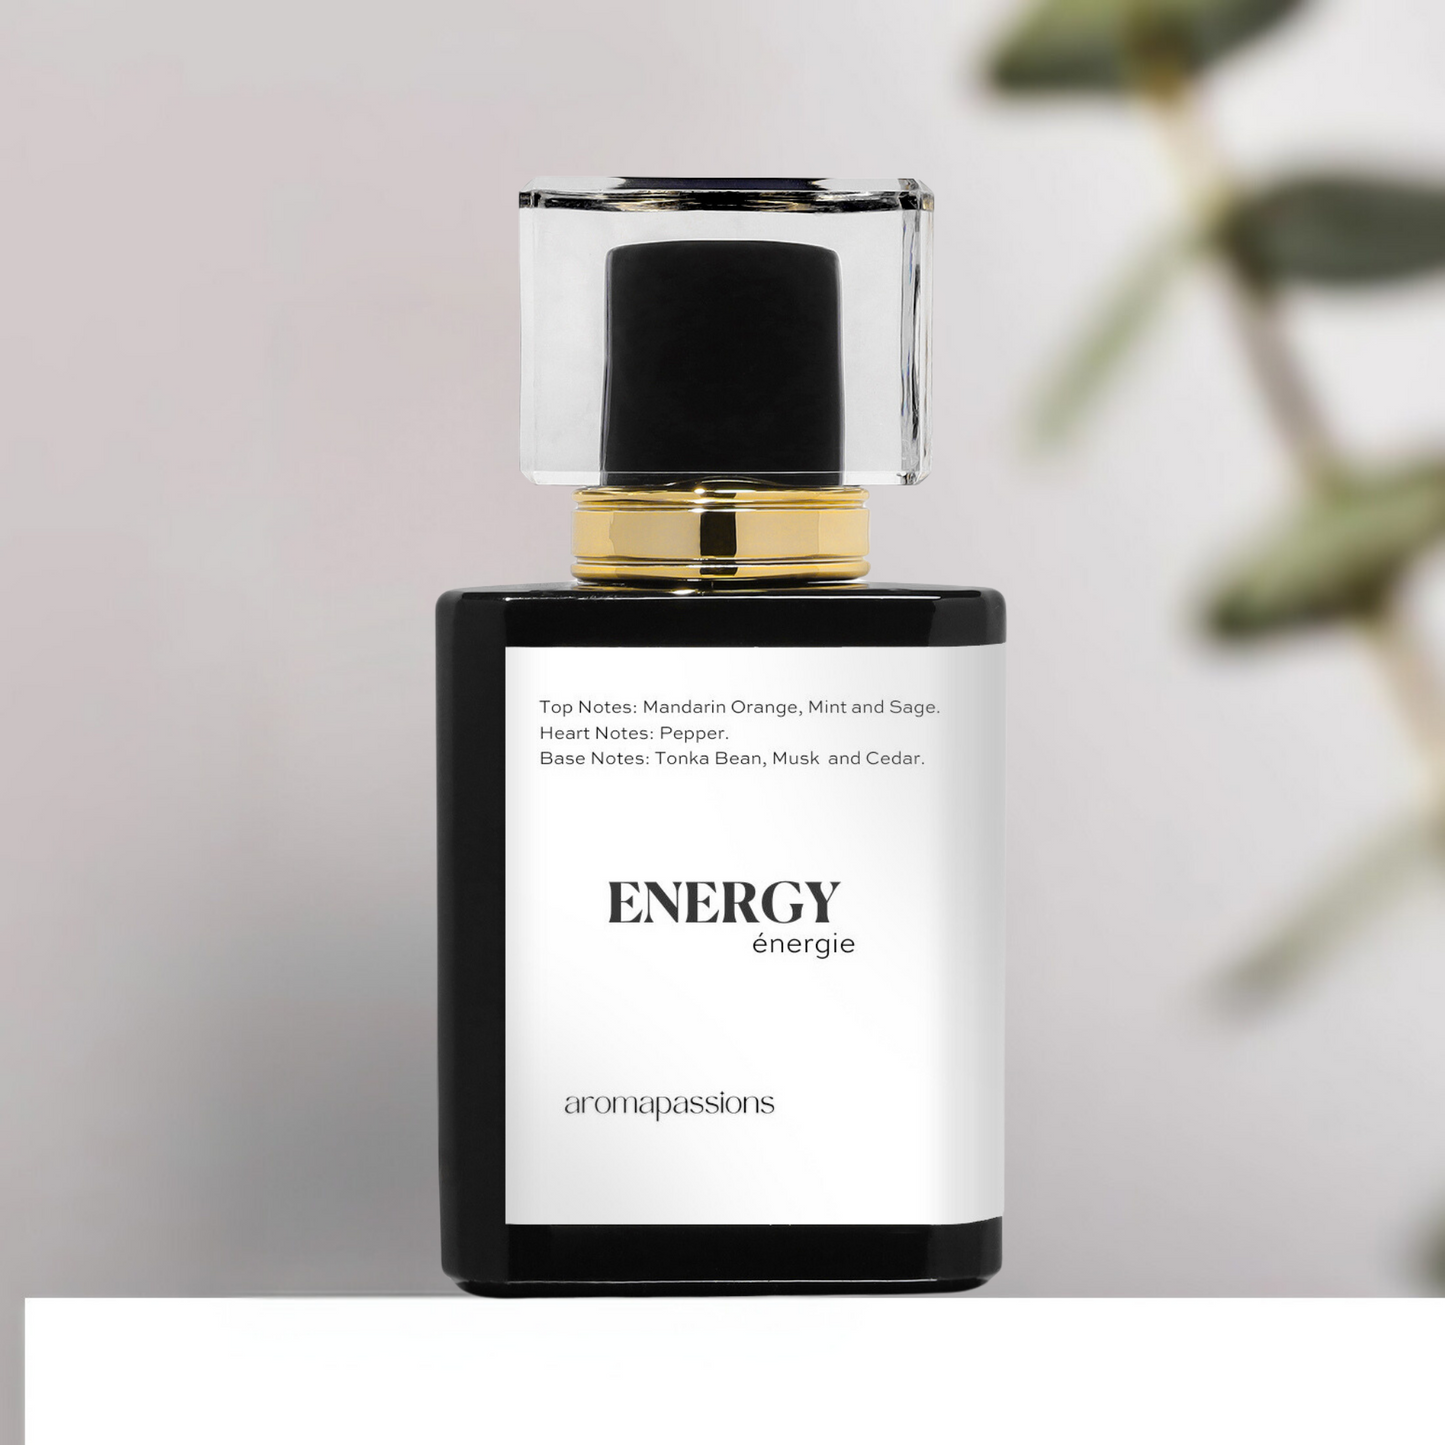 ENERGY | Inspired by CHANEL ALLURE HOMME SPORT EAU EXTREME | Allure Homme Sport Extreme Dupe Pheromone Perfume